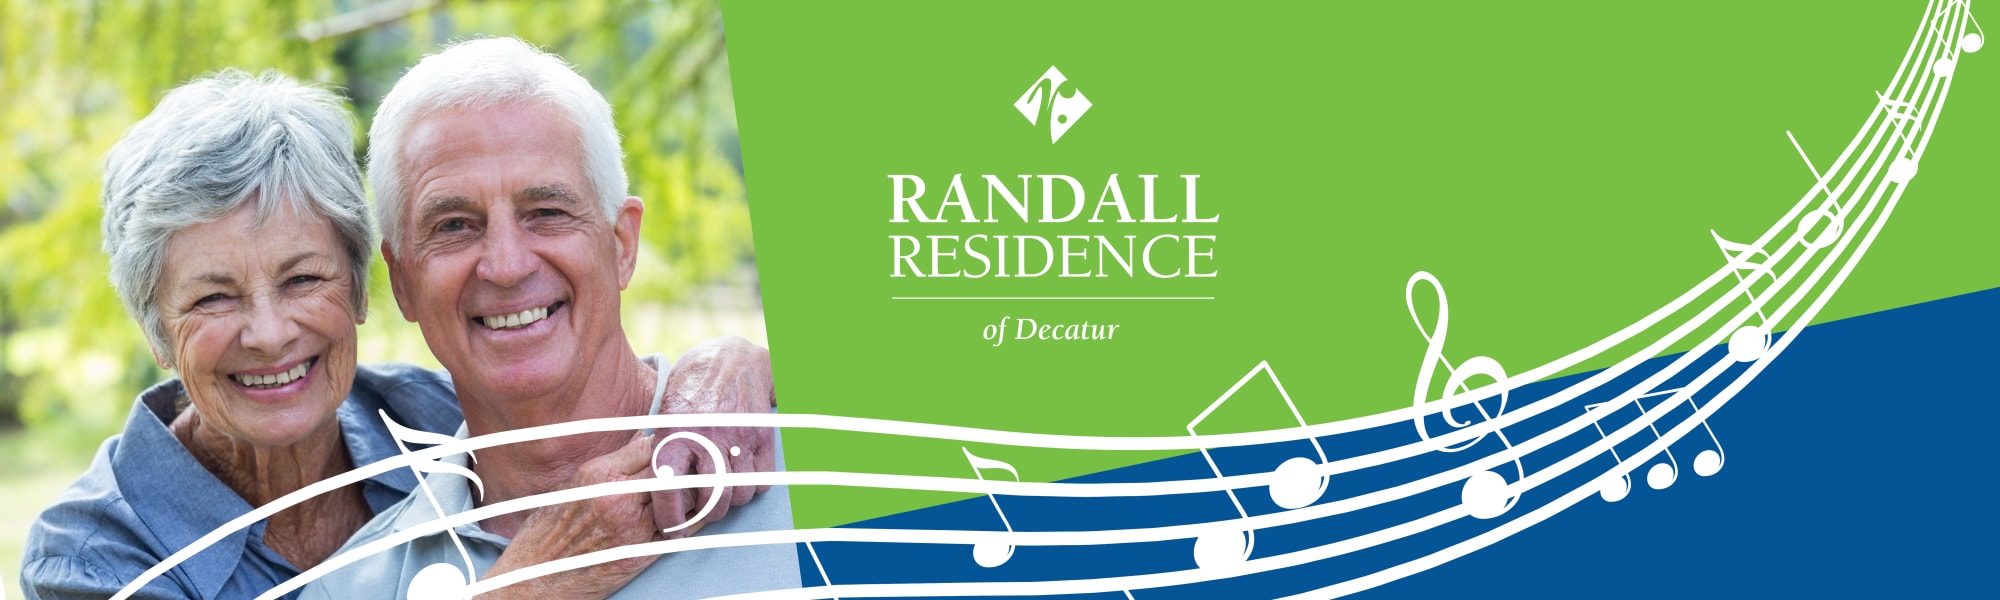 Events at Randall Residence of Decatur in Decatur, Illinois